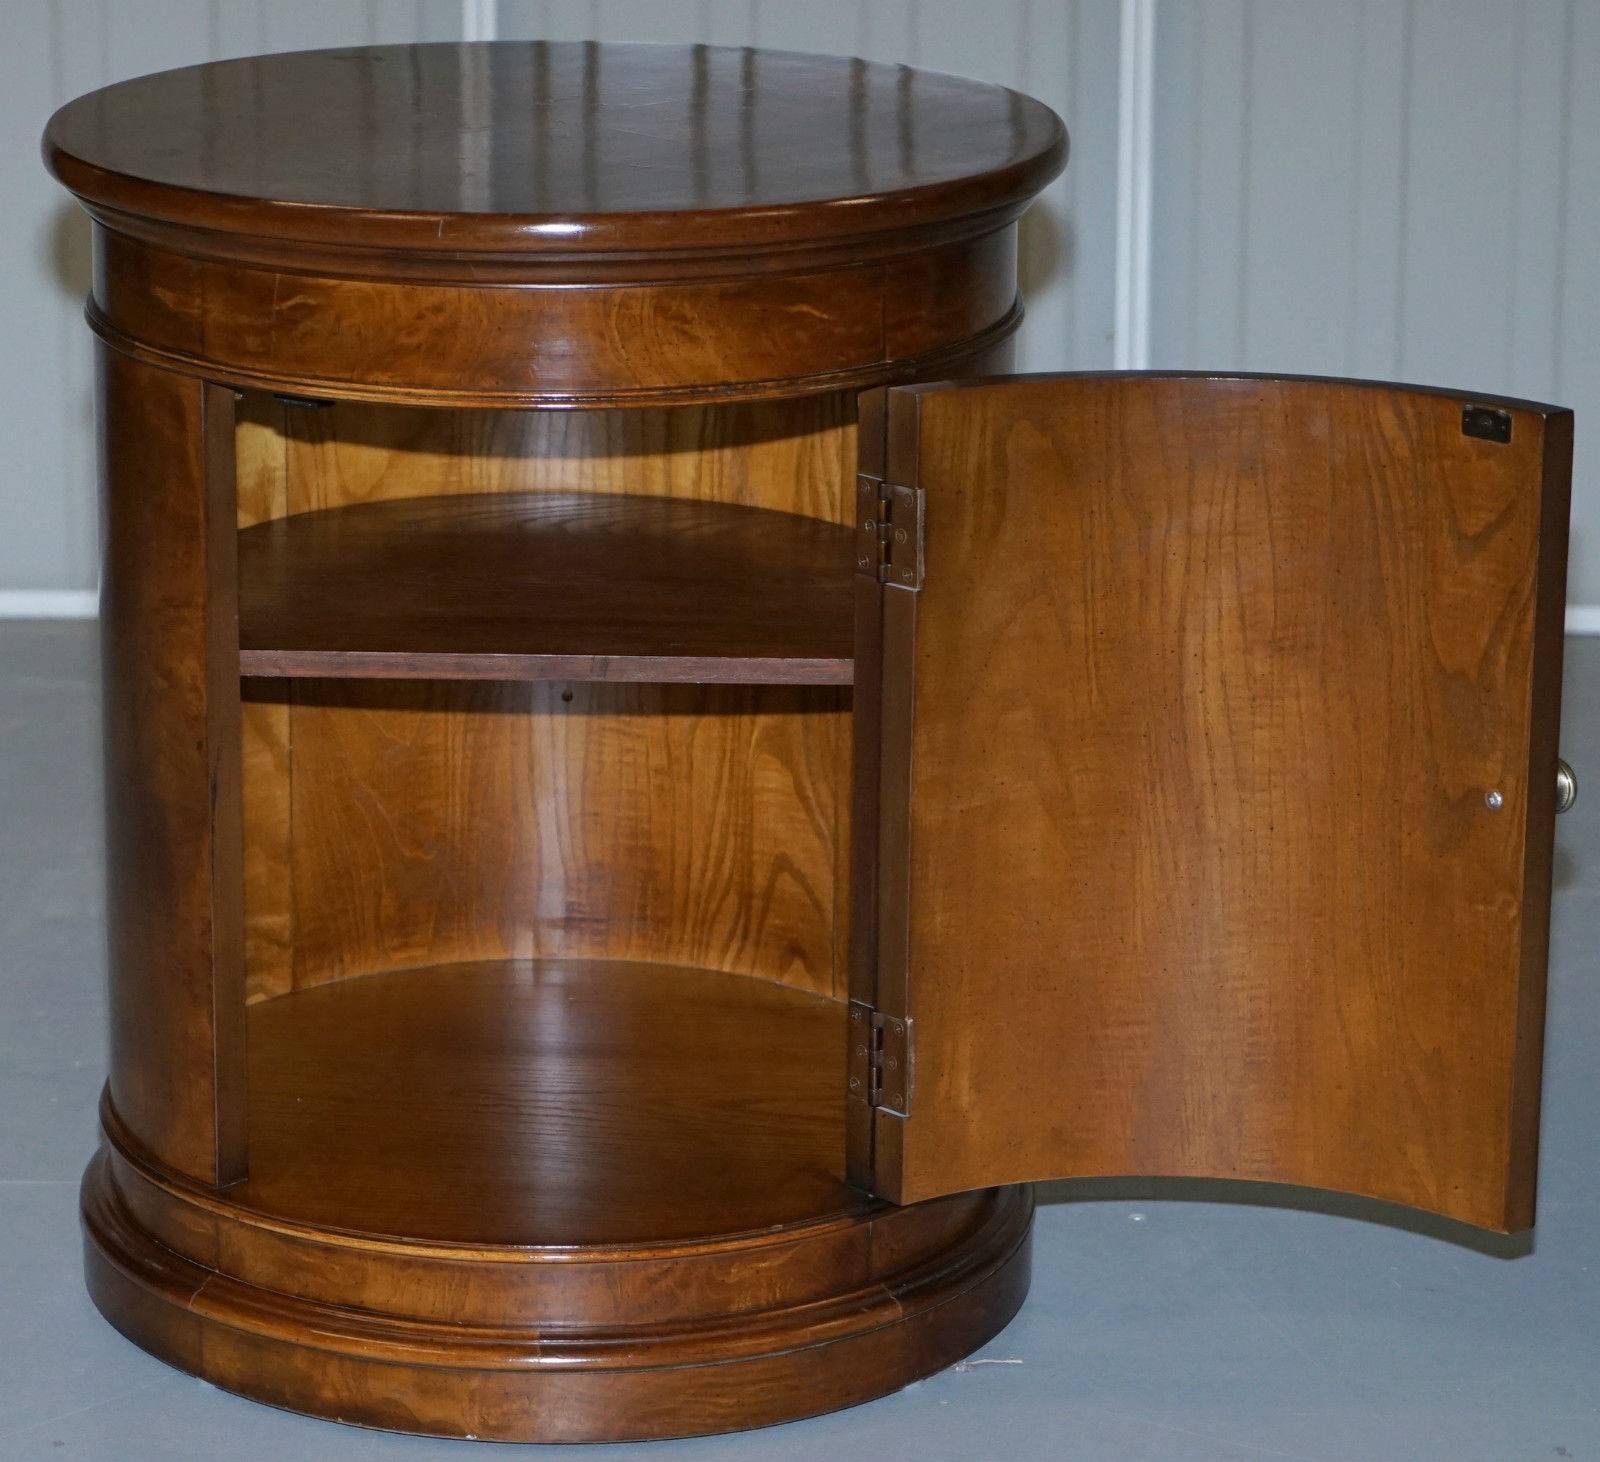 Stunning French Burr Walnut Side End Round Drum Table Mind Blowing Timber Patina 1